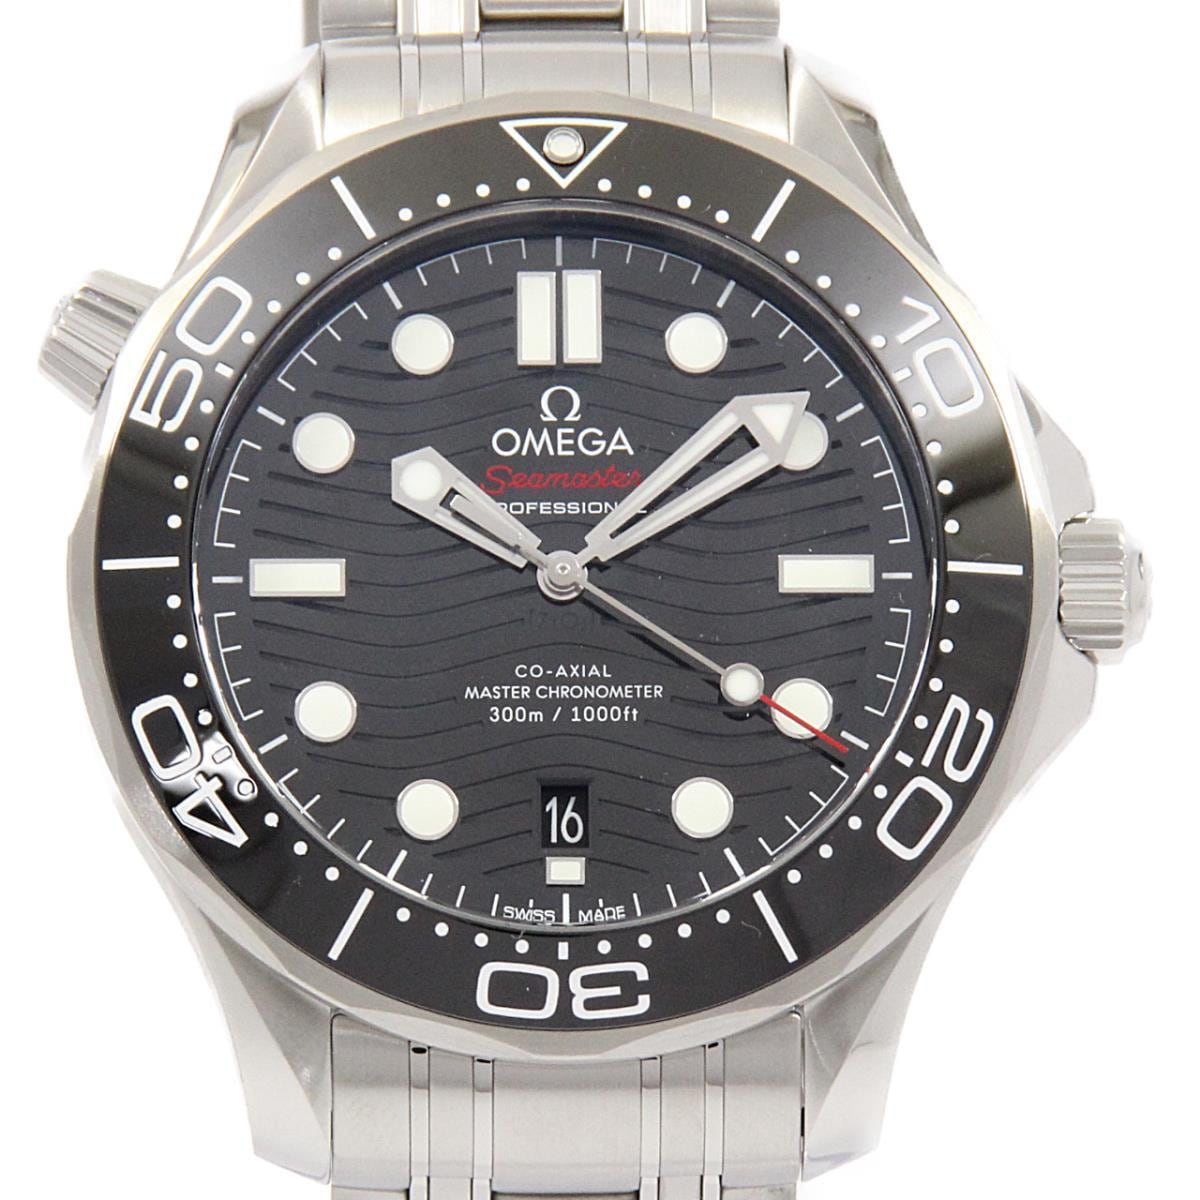 [BRAND NEW] Omega 210.30.42.20.01.001 Seamaster Diver 300M Automatic